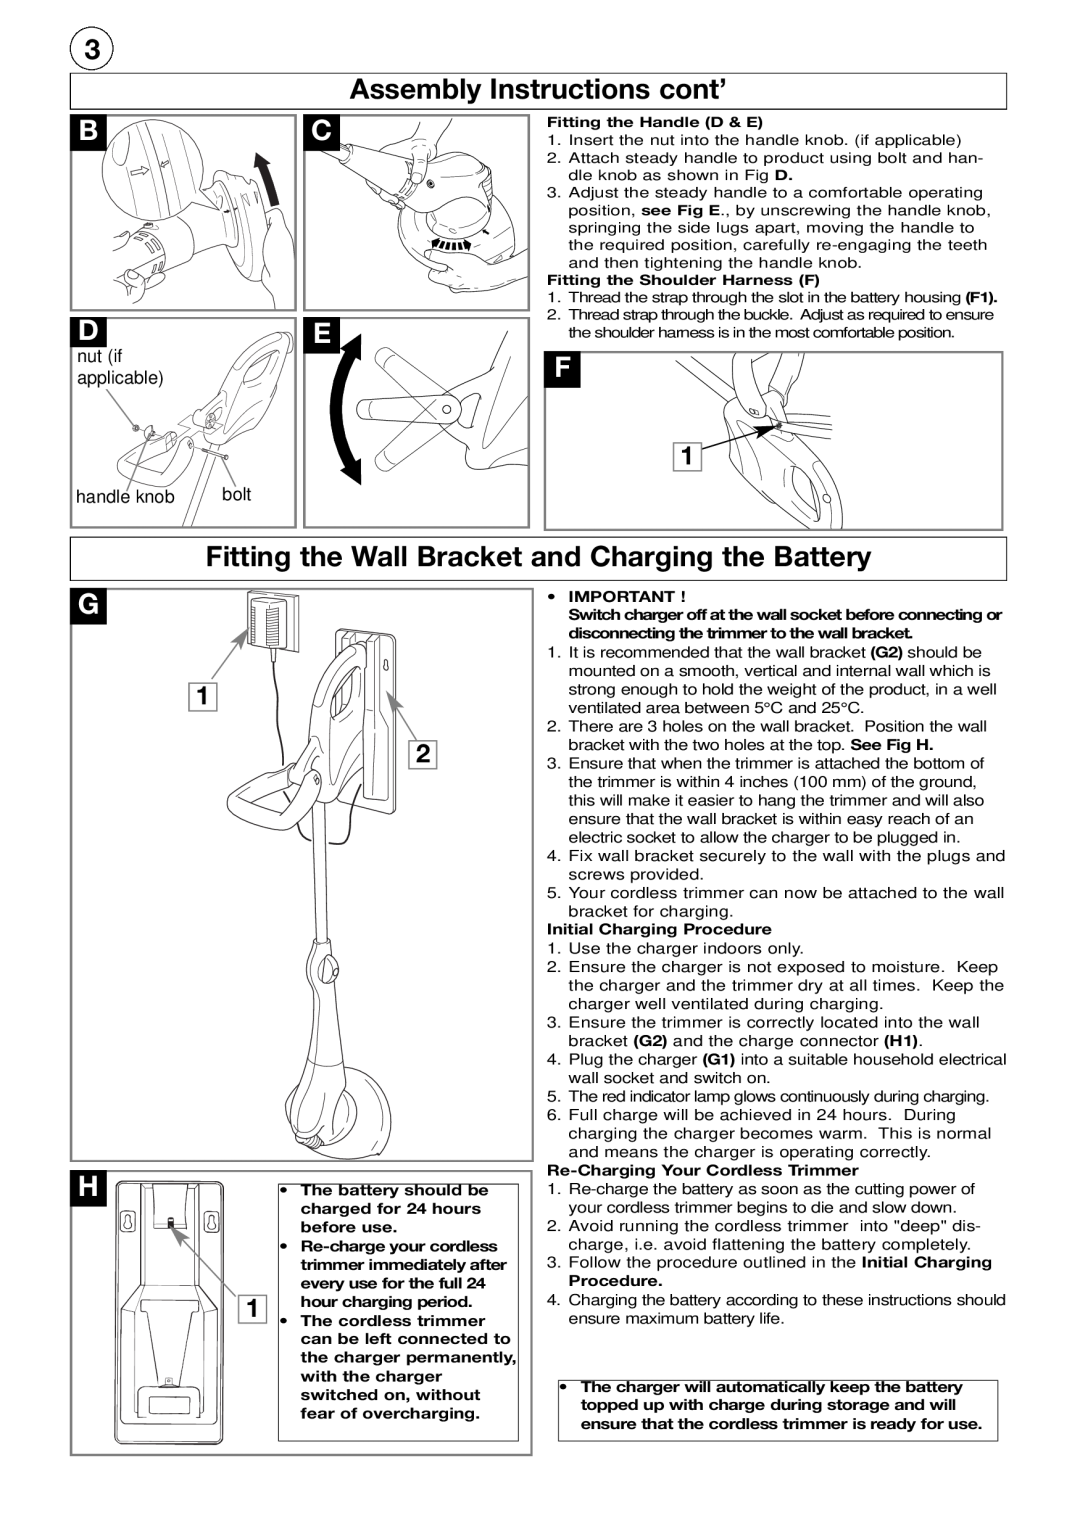 Flymo CT250 manual Assembly Instructions cont’, Fitting the Wall Bracket and Charging the Battery, nut if, applicable, bolt 